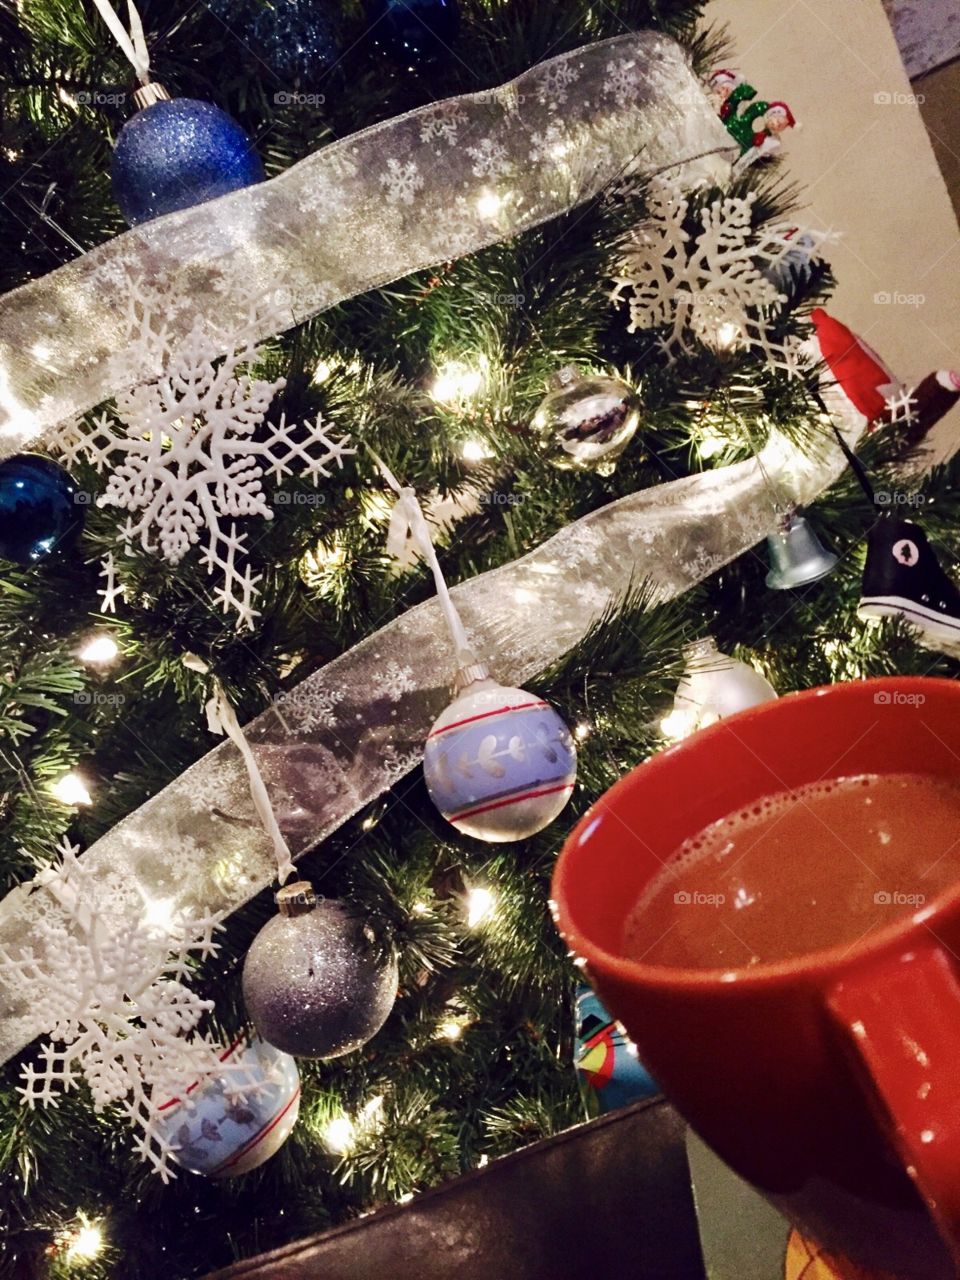 Coffee by the tree